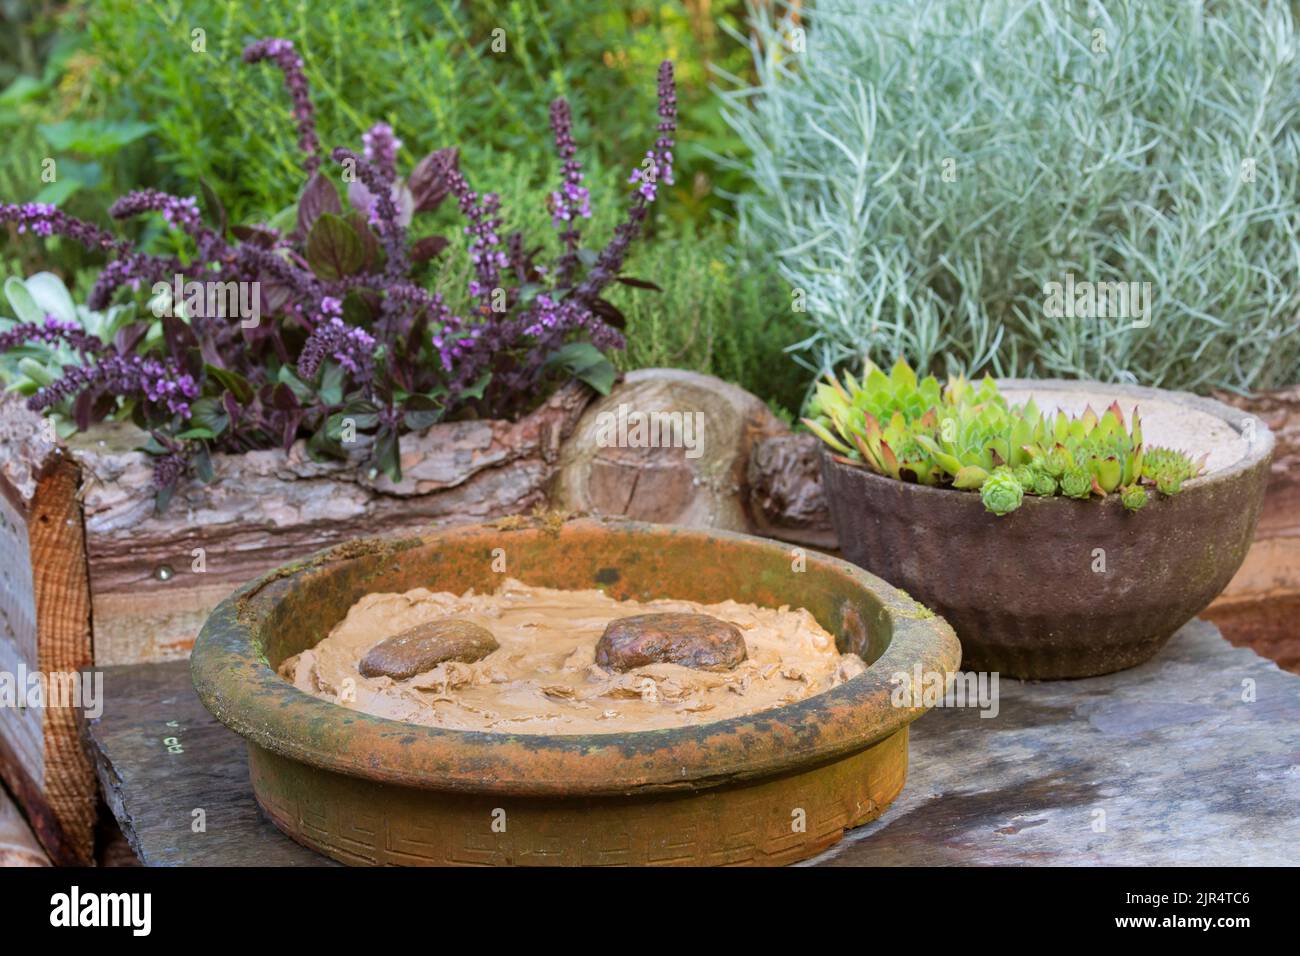 dish with moist clay in the garden as an opportunity for birds and insects to find nesting material, Germany Stock Photo